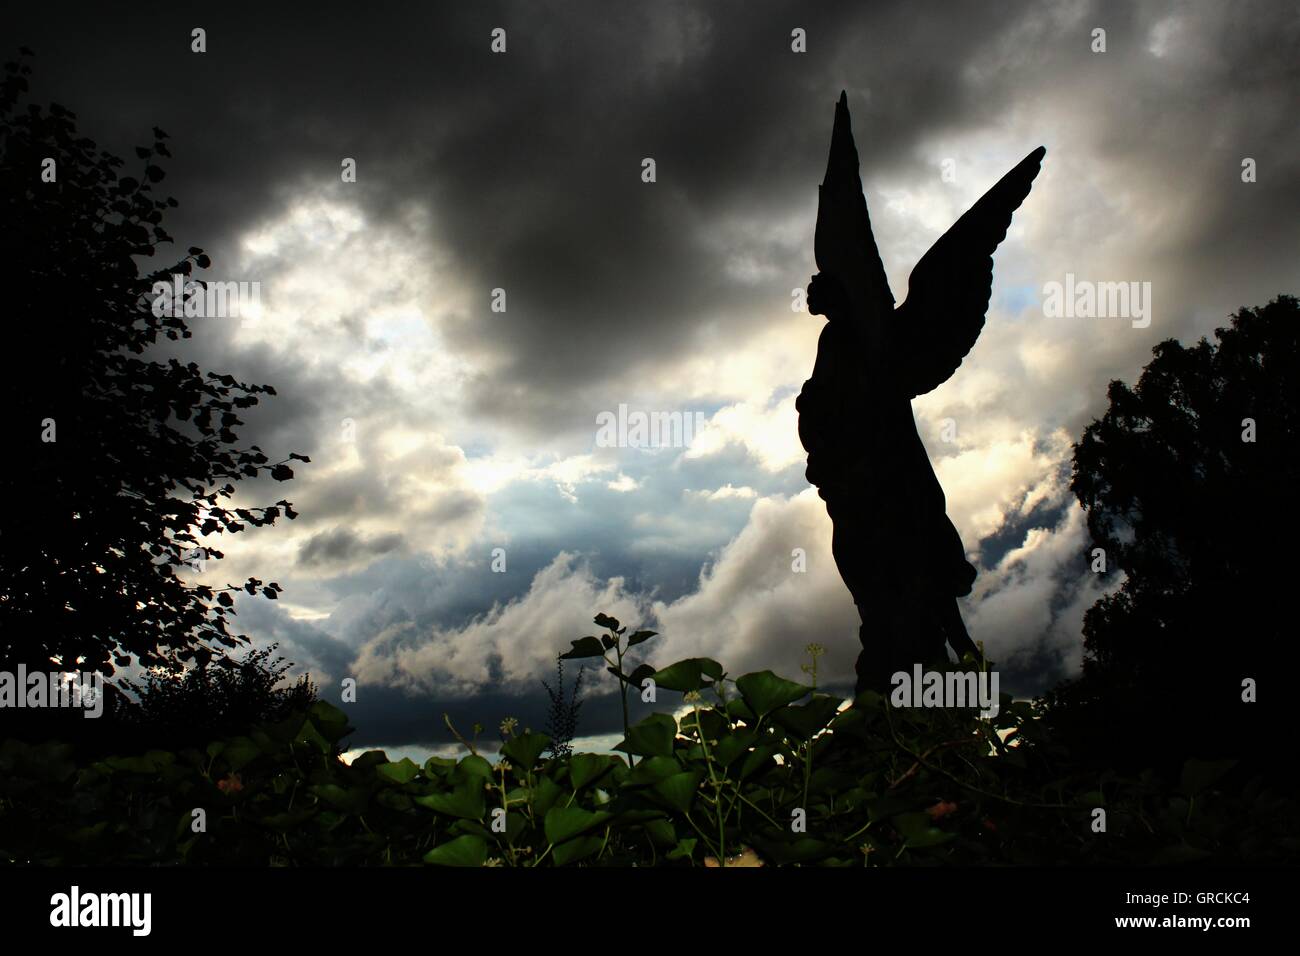 Angel Before Dramatic Clouds Scenery Stock Photo